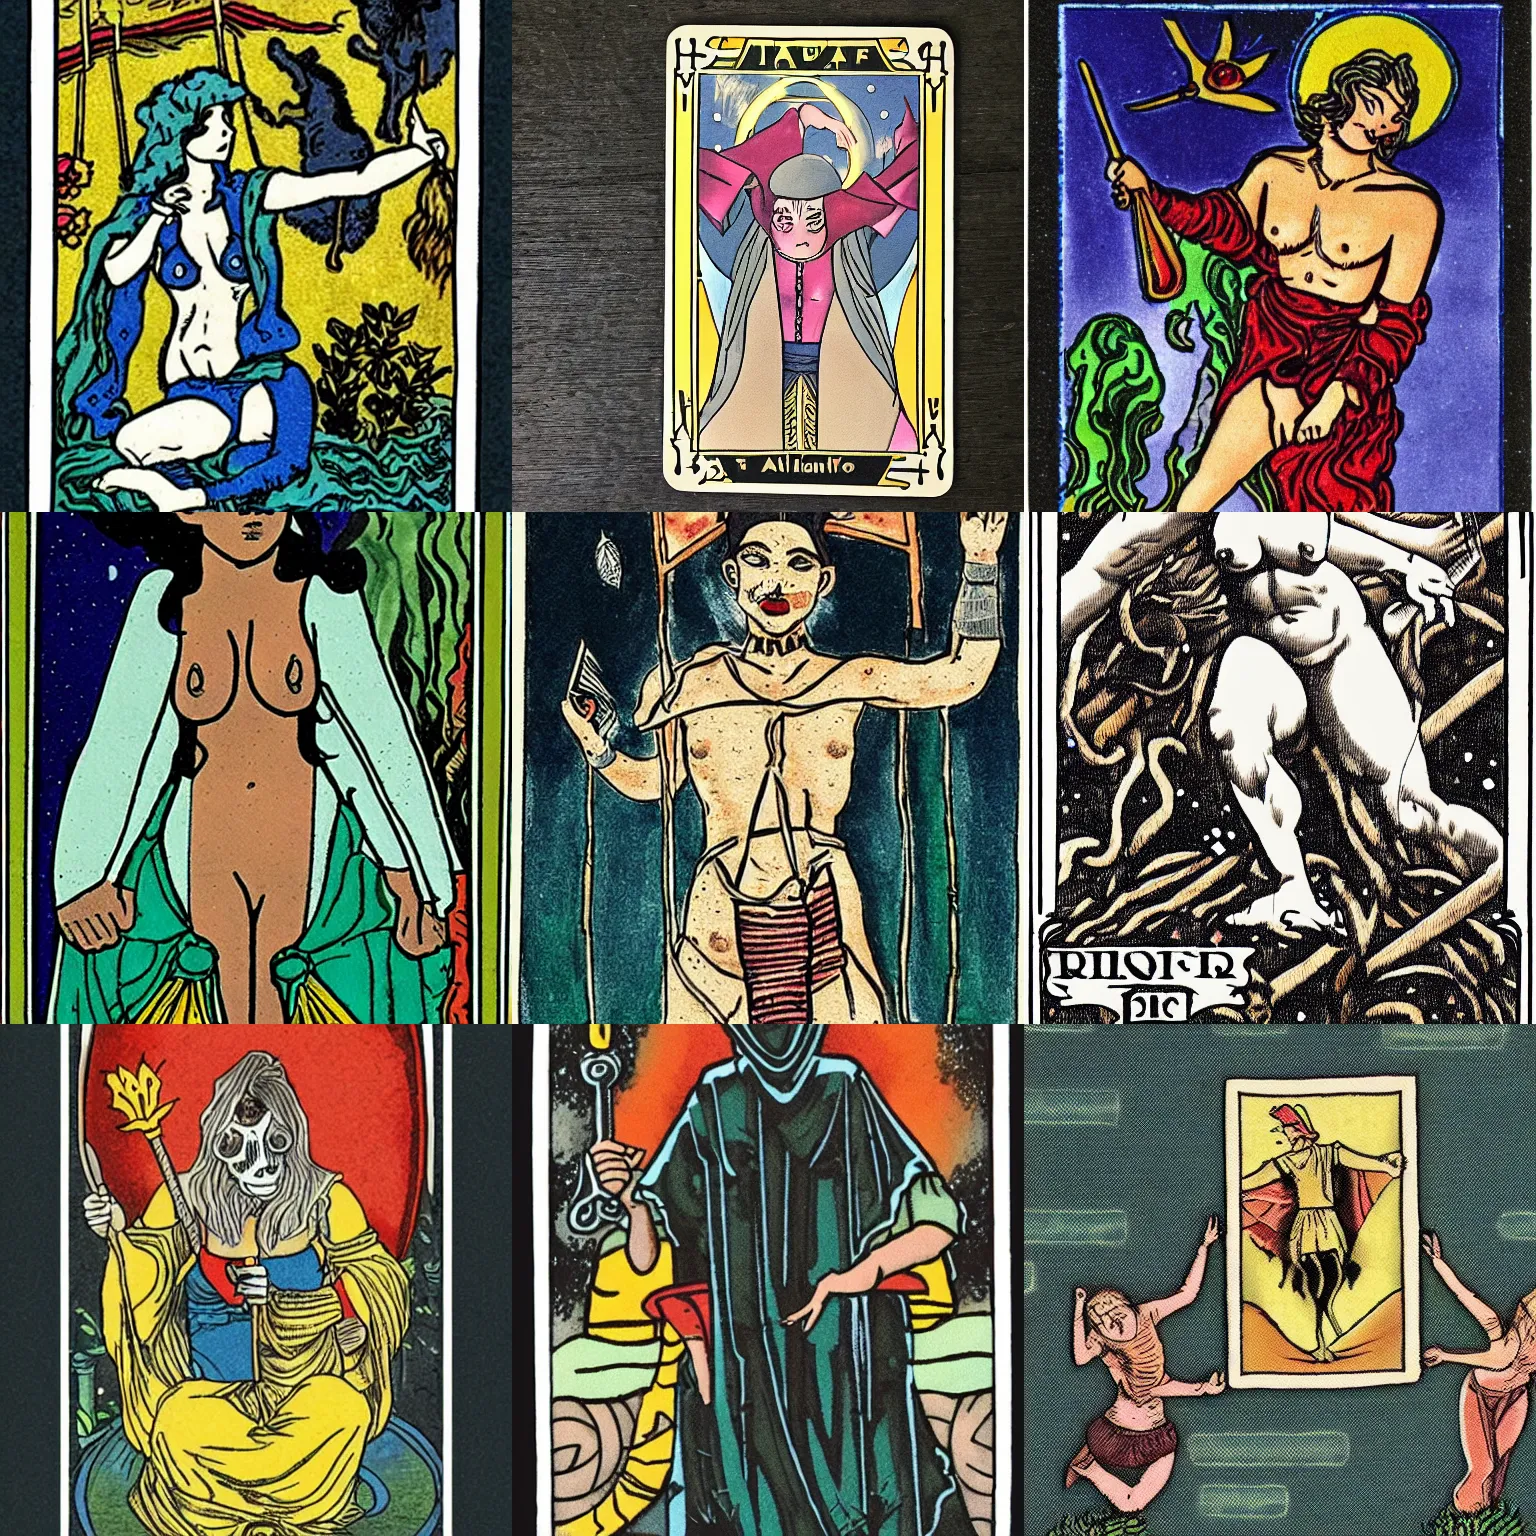 Prompt: alternative tarot card leaving much for the imagination to introspect